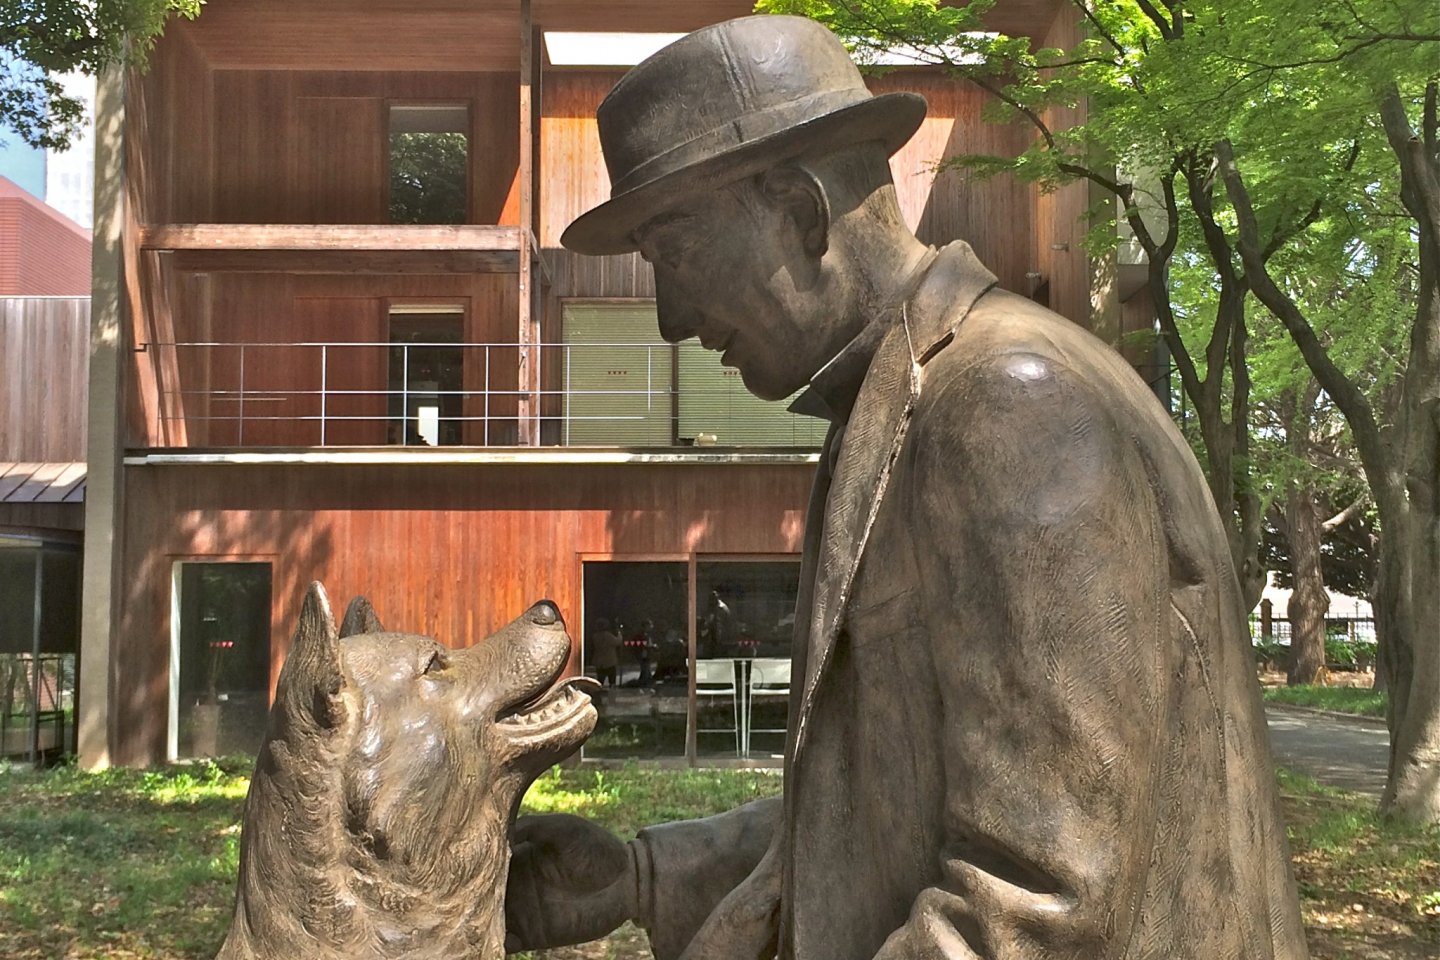 The legendary loyal Akita is finally reunited with his Master, Professor Hidesaburo Ueno, at the Department of Agriculture inside the University of Tokyo. Unveiled March 9, 2015.